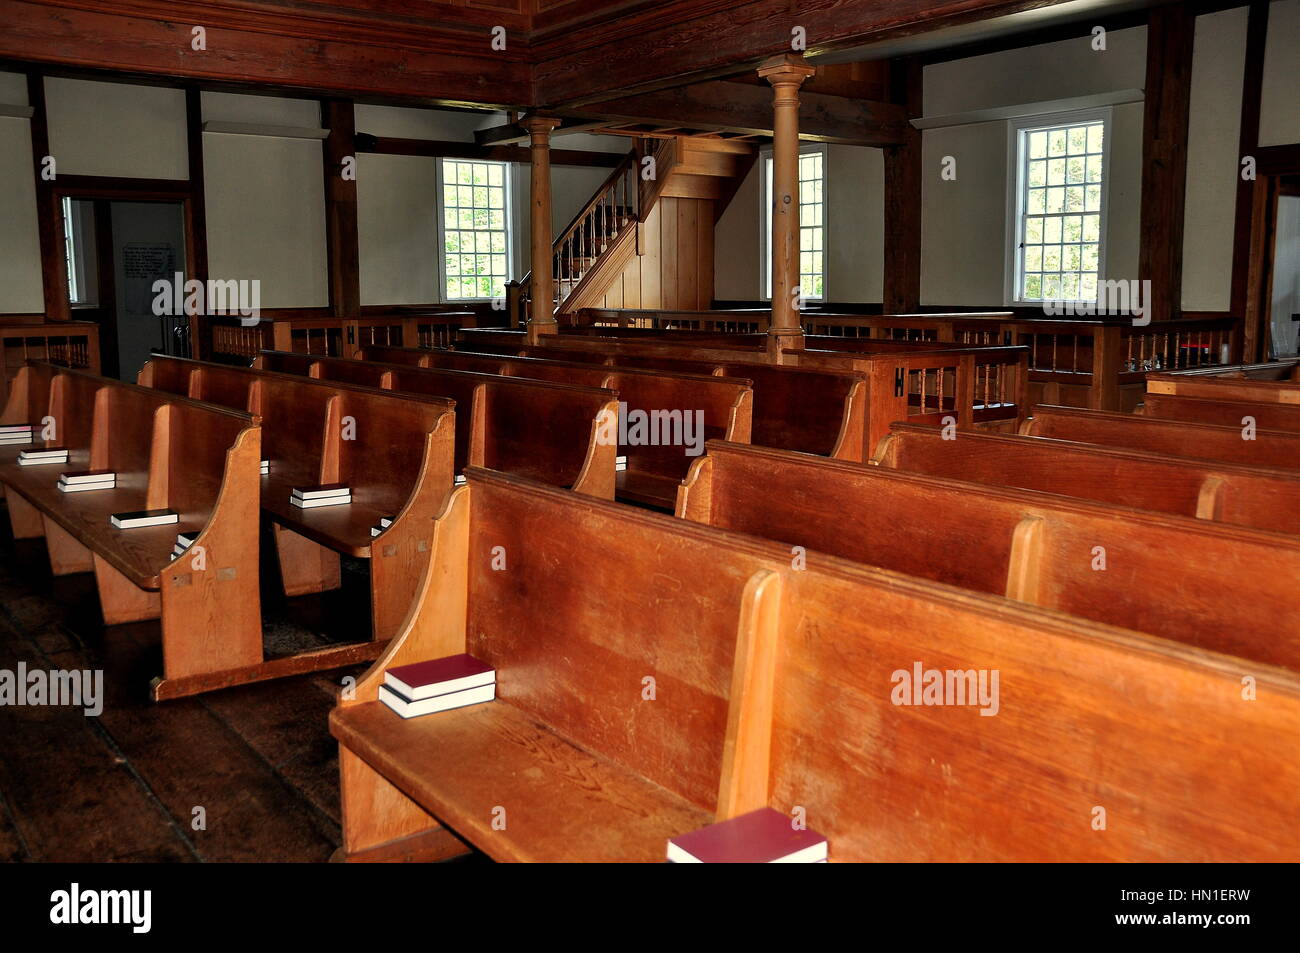 West Barnstable, Massachusetts - July 13, 2015:  Wooden pews with prayer hymnals inside the historic 1717 West Barnstable Parish Meeting House Stock Photo